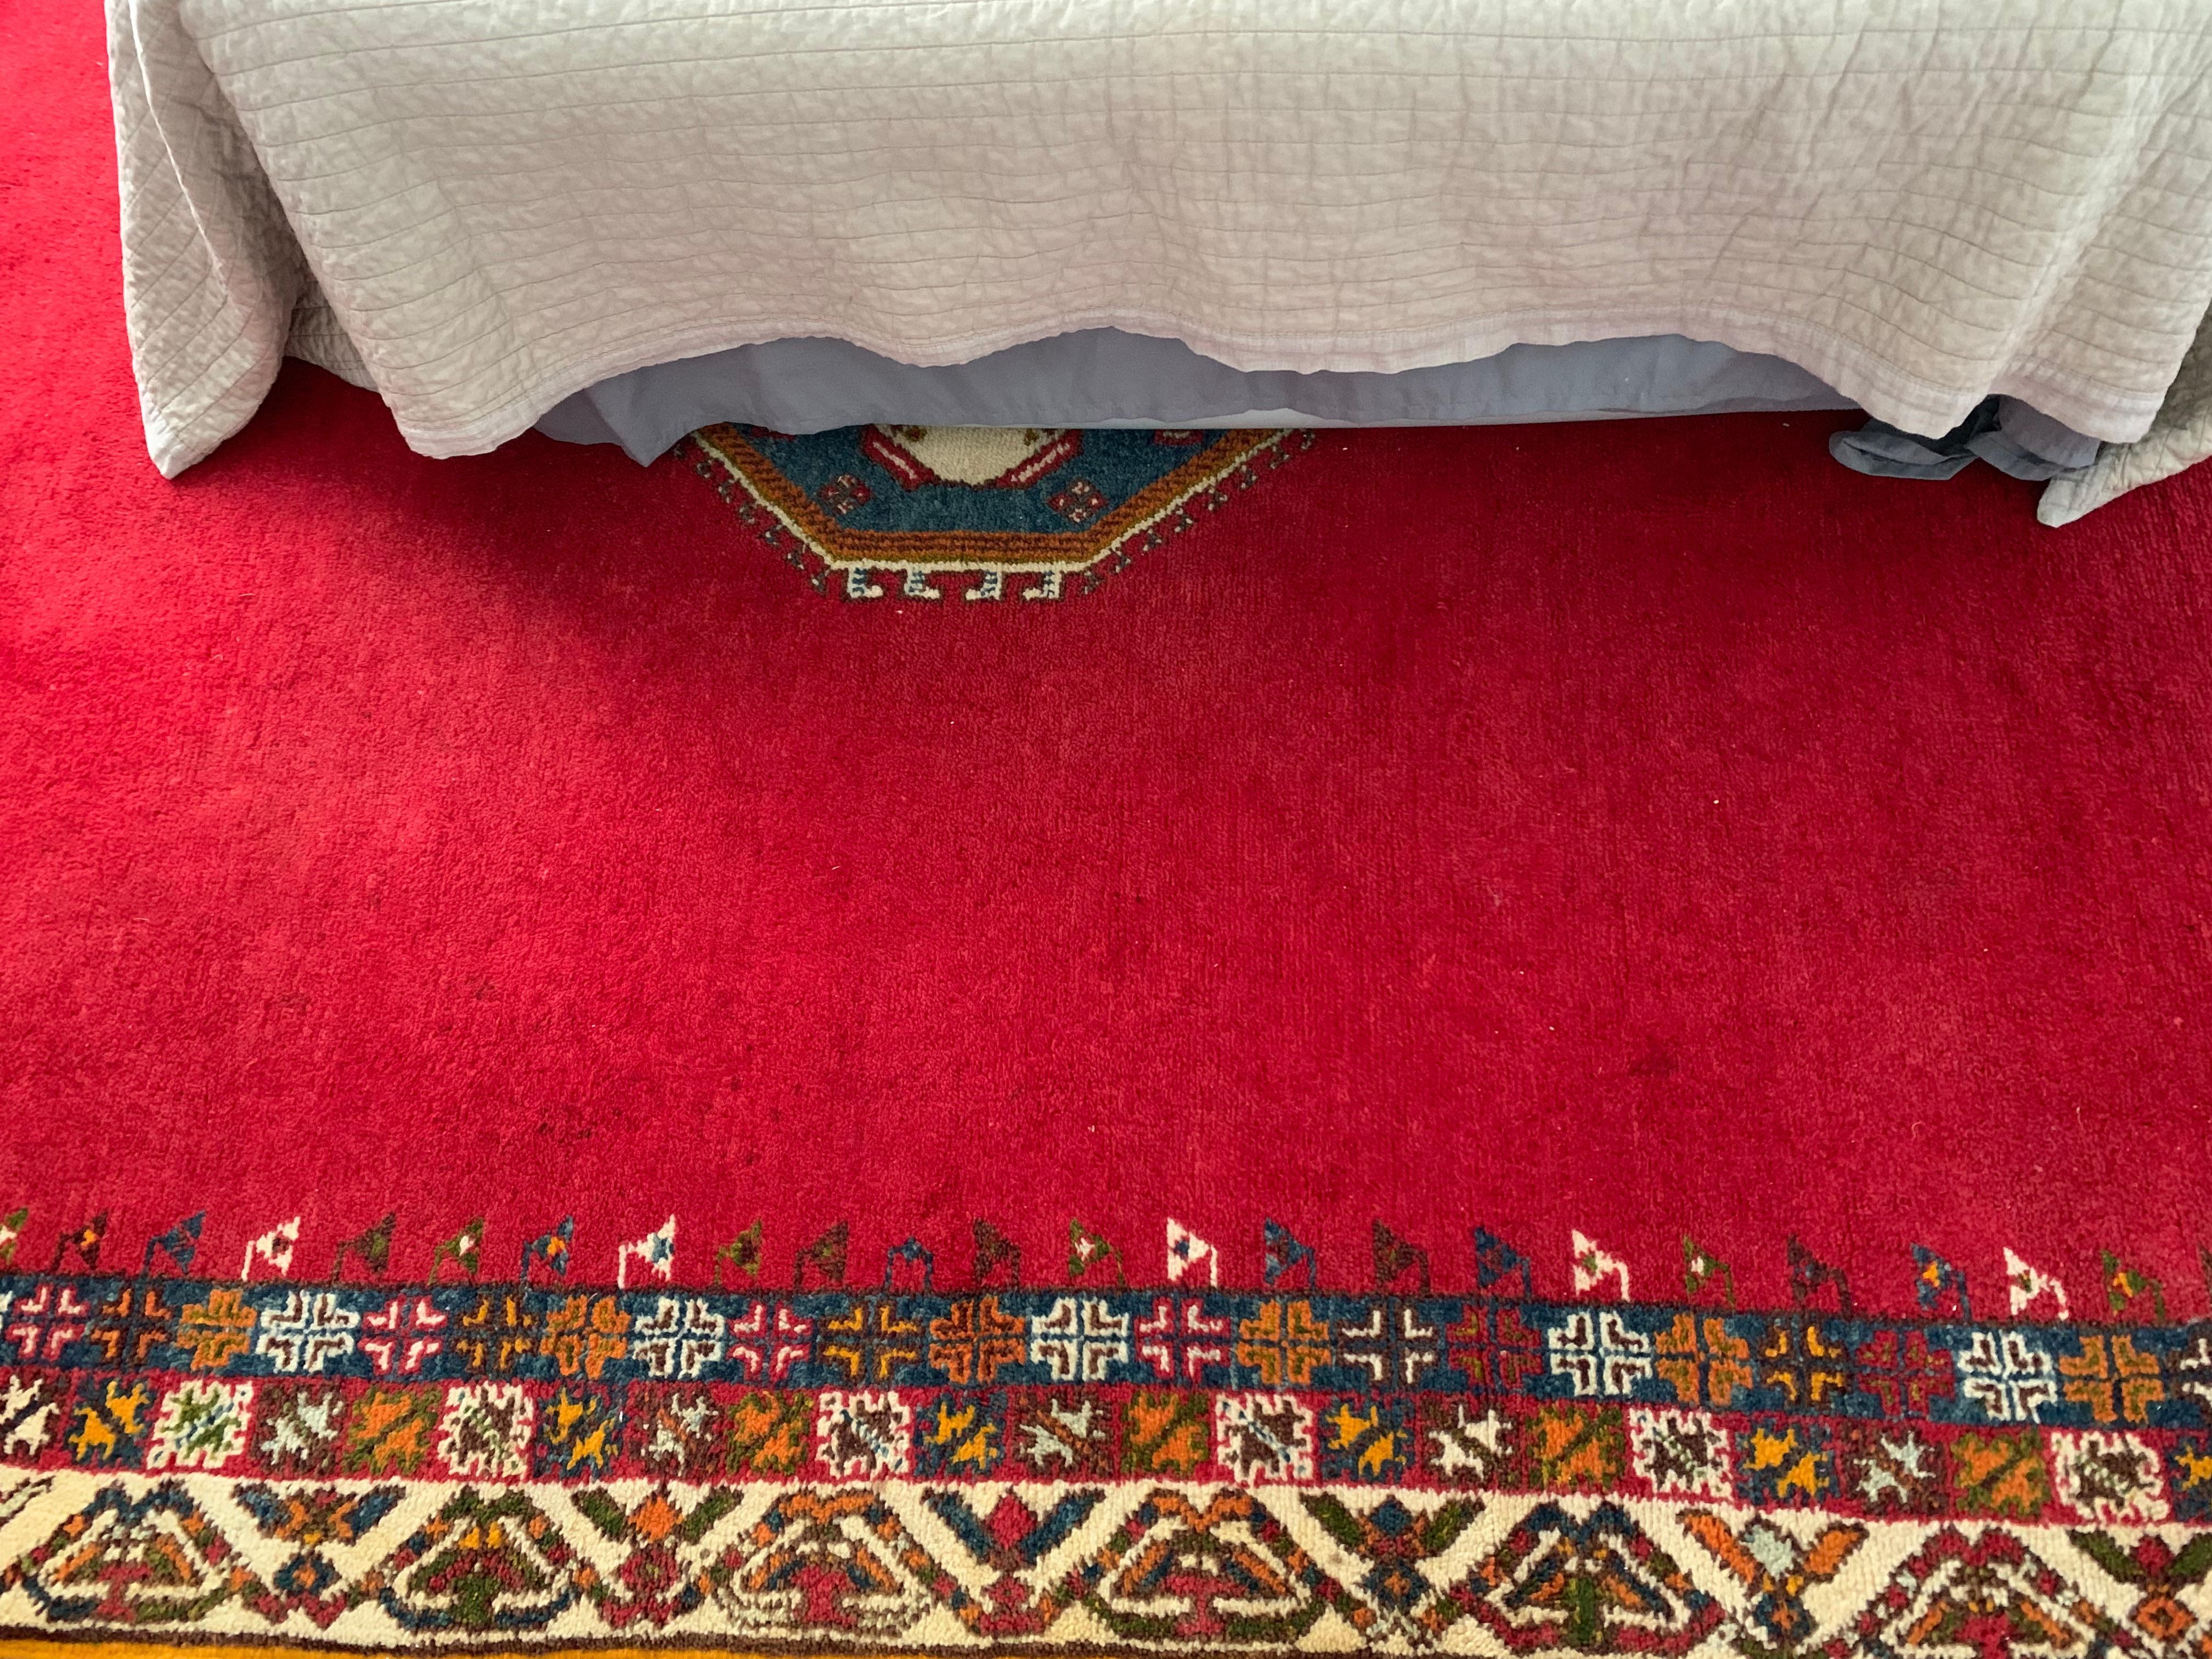 A vibrant red moroccan handmade wool carpet.  Berber people, known for their nomadic lifestyle, pass down the art of weaving through generations, with each tribe having it's distinct style, patterns, and techniques. Berber rugs often feature